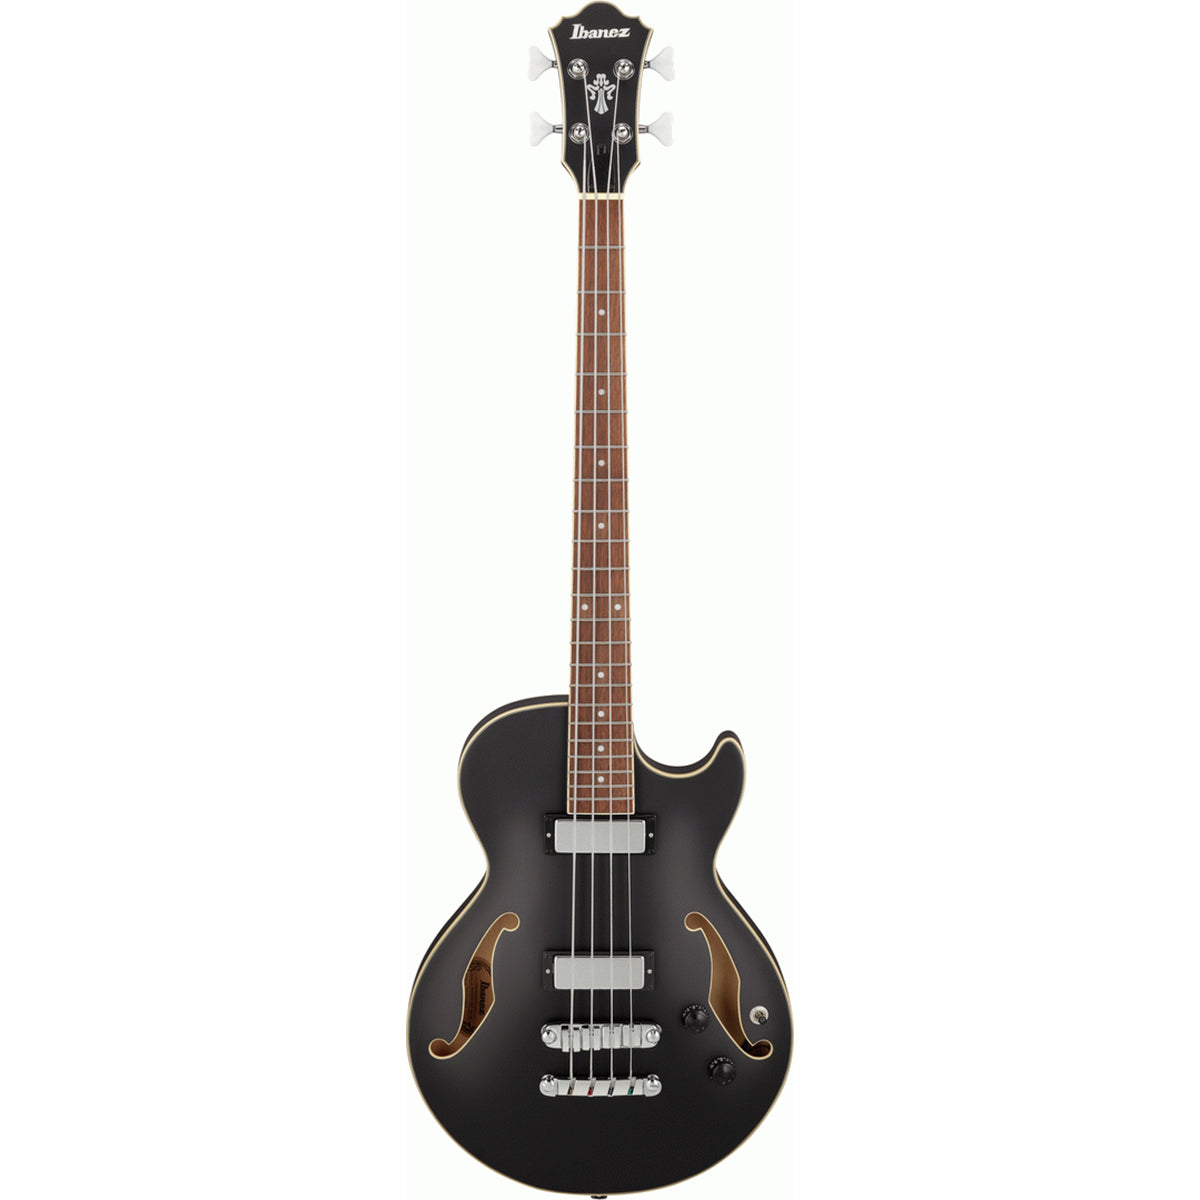 Ibanez AGB200 Artcore Electric Bass Guitar Hollow Body Black Flat